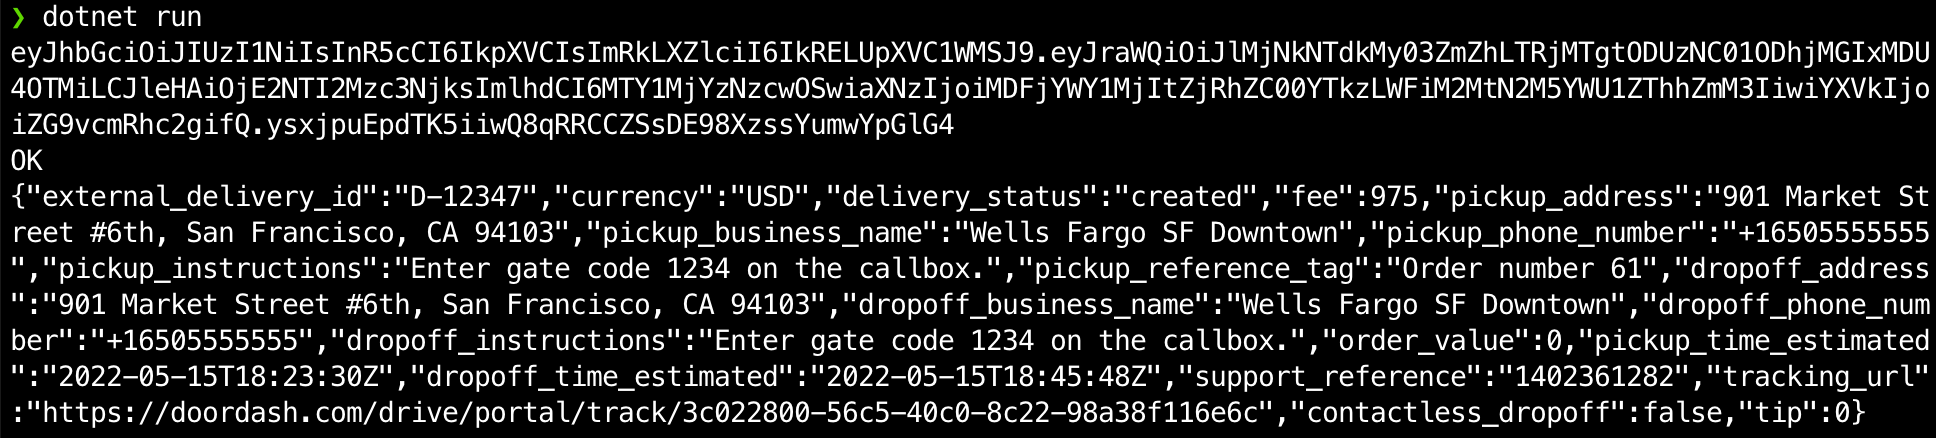 A screenshot of a terminal showing the output of creating a delivery